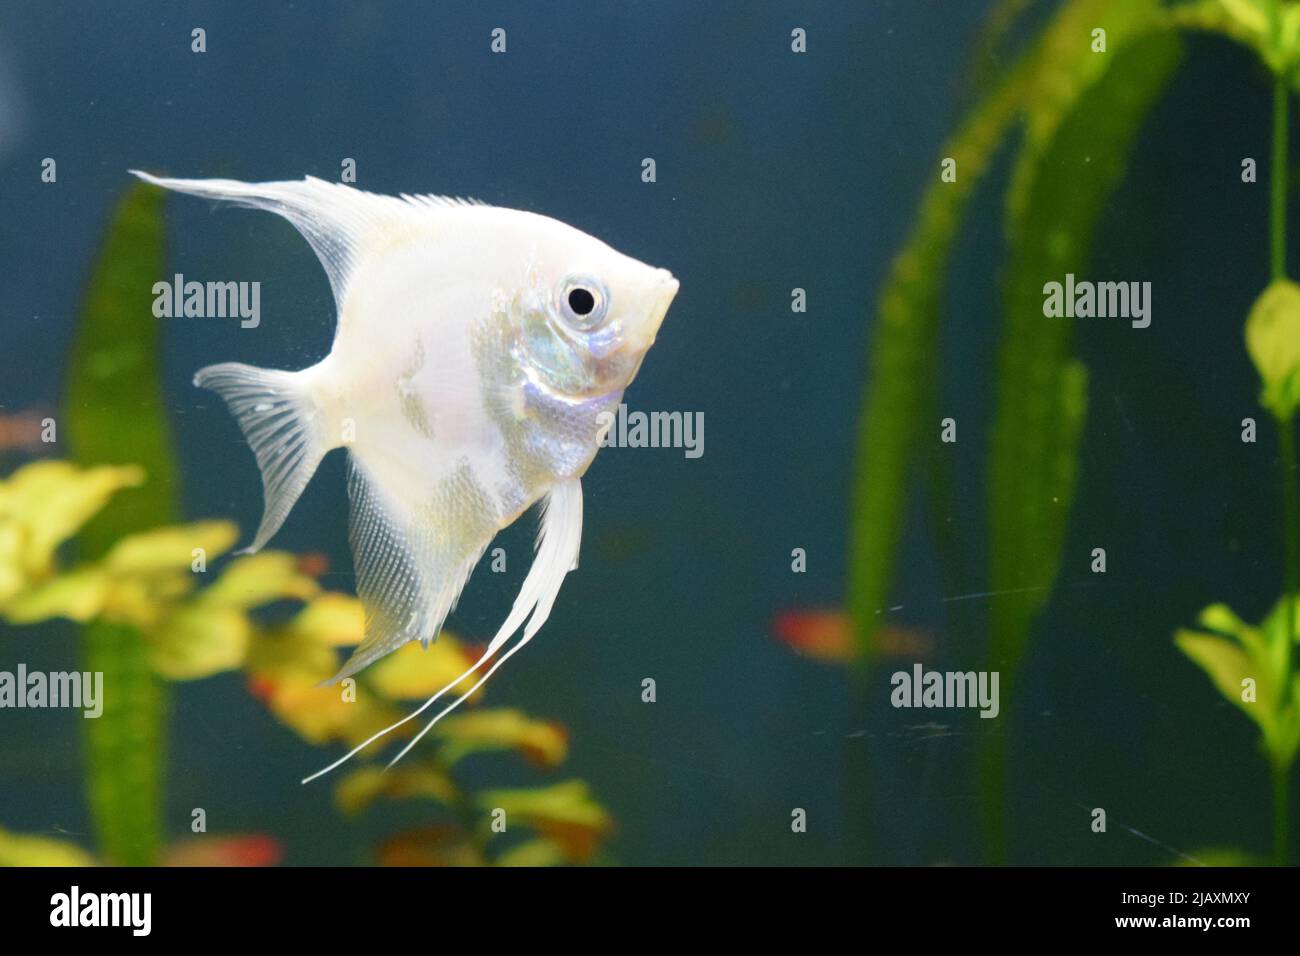 Fresh water planted aquarium with silver angelfish. Angelfish in tank fish with blurred background (Pterophyllum scalare) Stock Photo